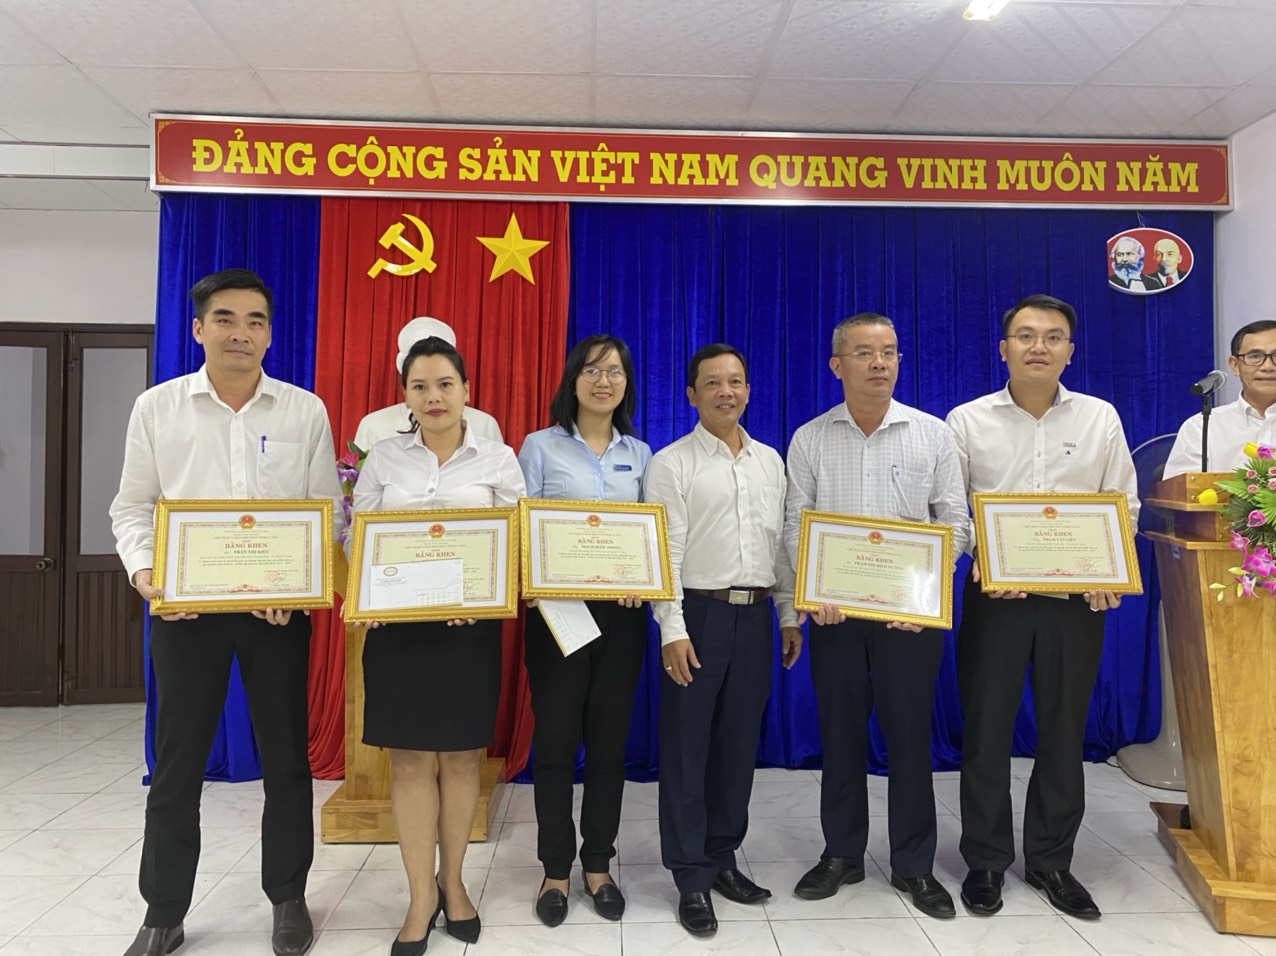 Kienlongbank recognized by the peoples committee of ca mau province for excellent performance in the period 2015 - 2020